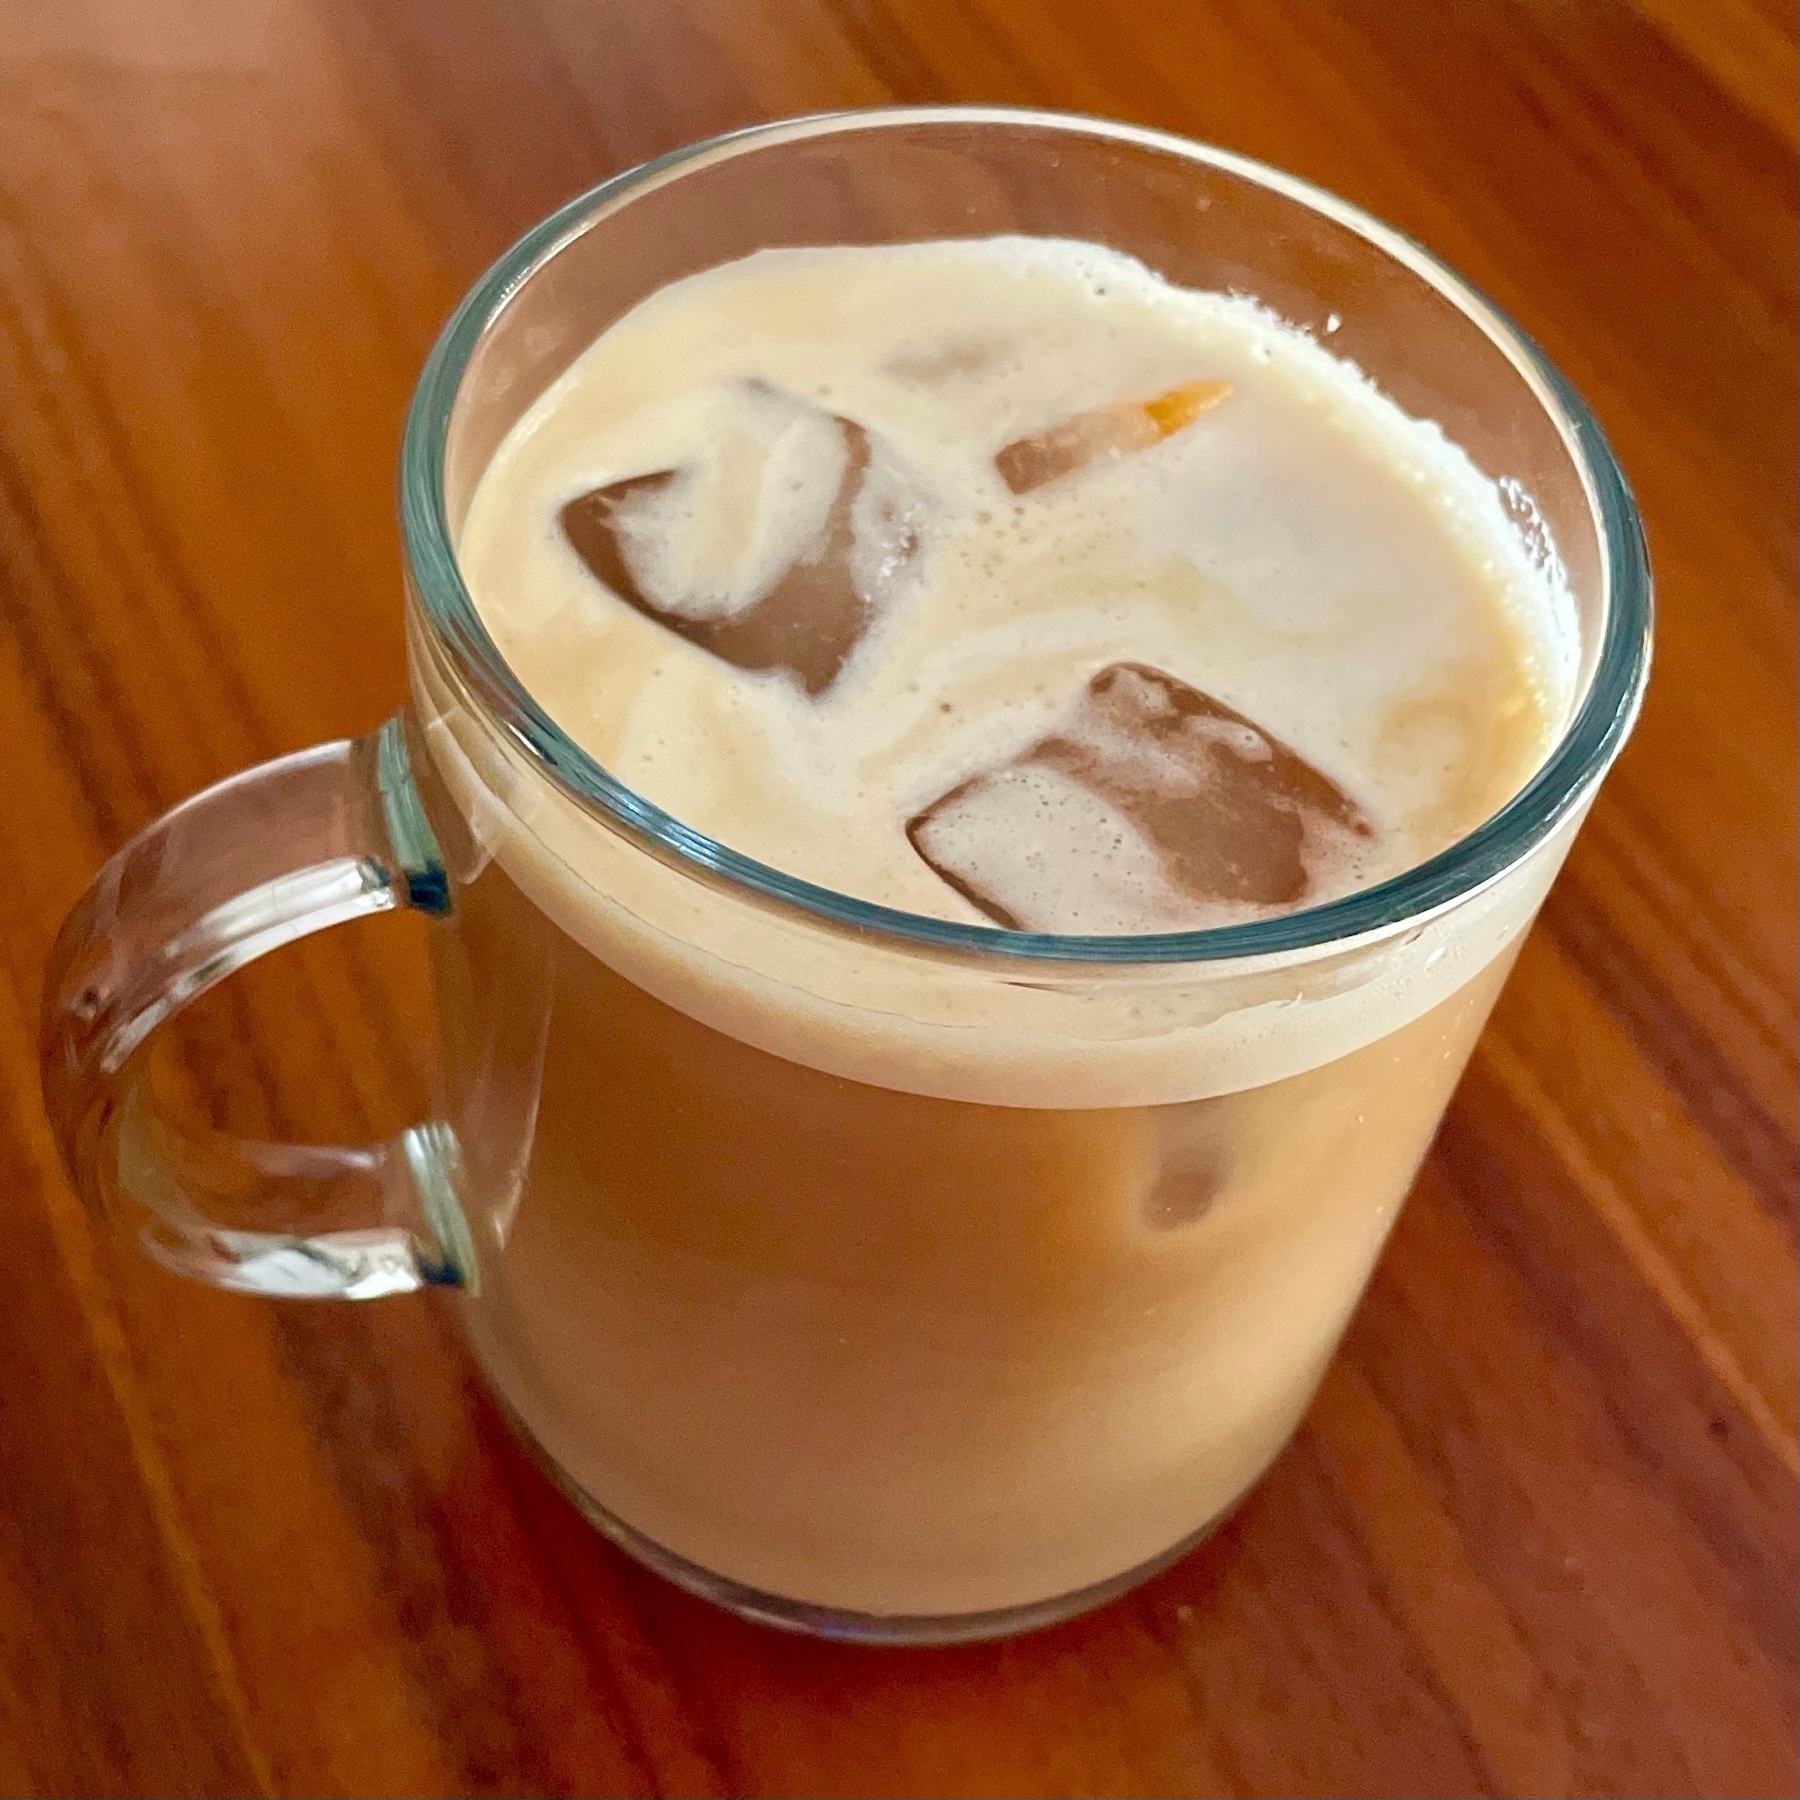 Cold milk cappuccino with ice in a transparent mug